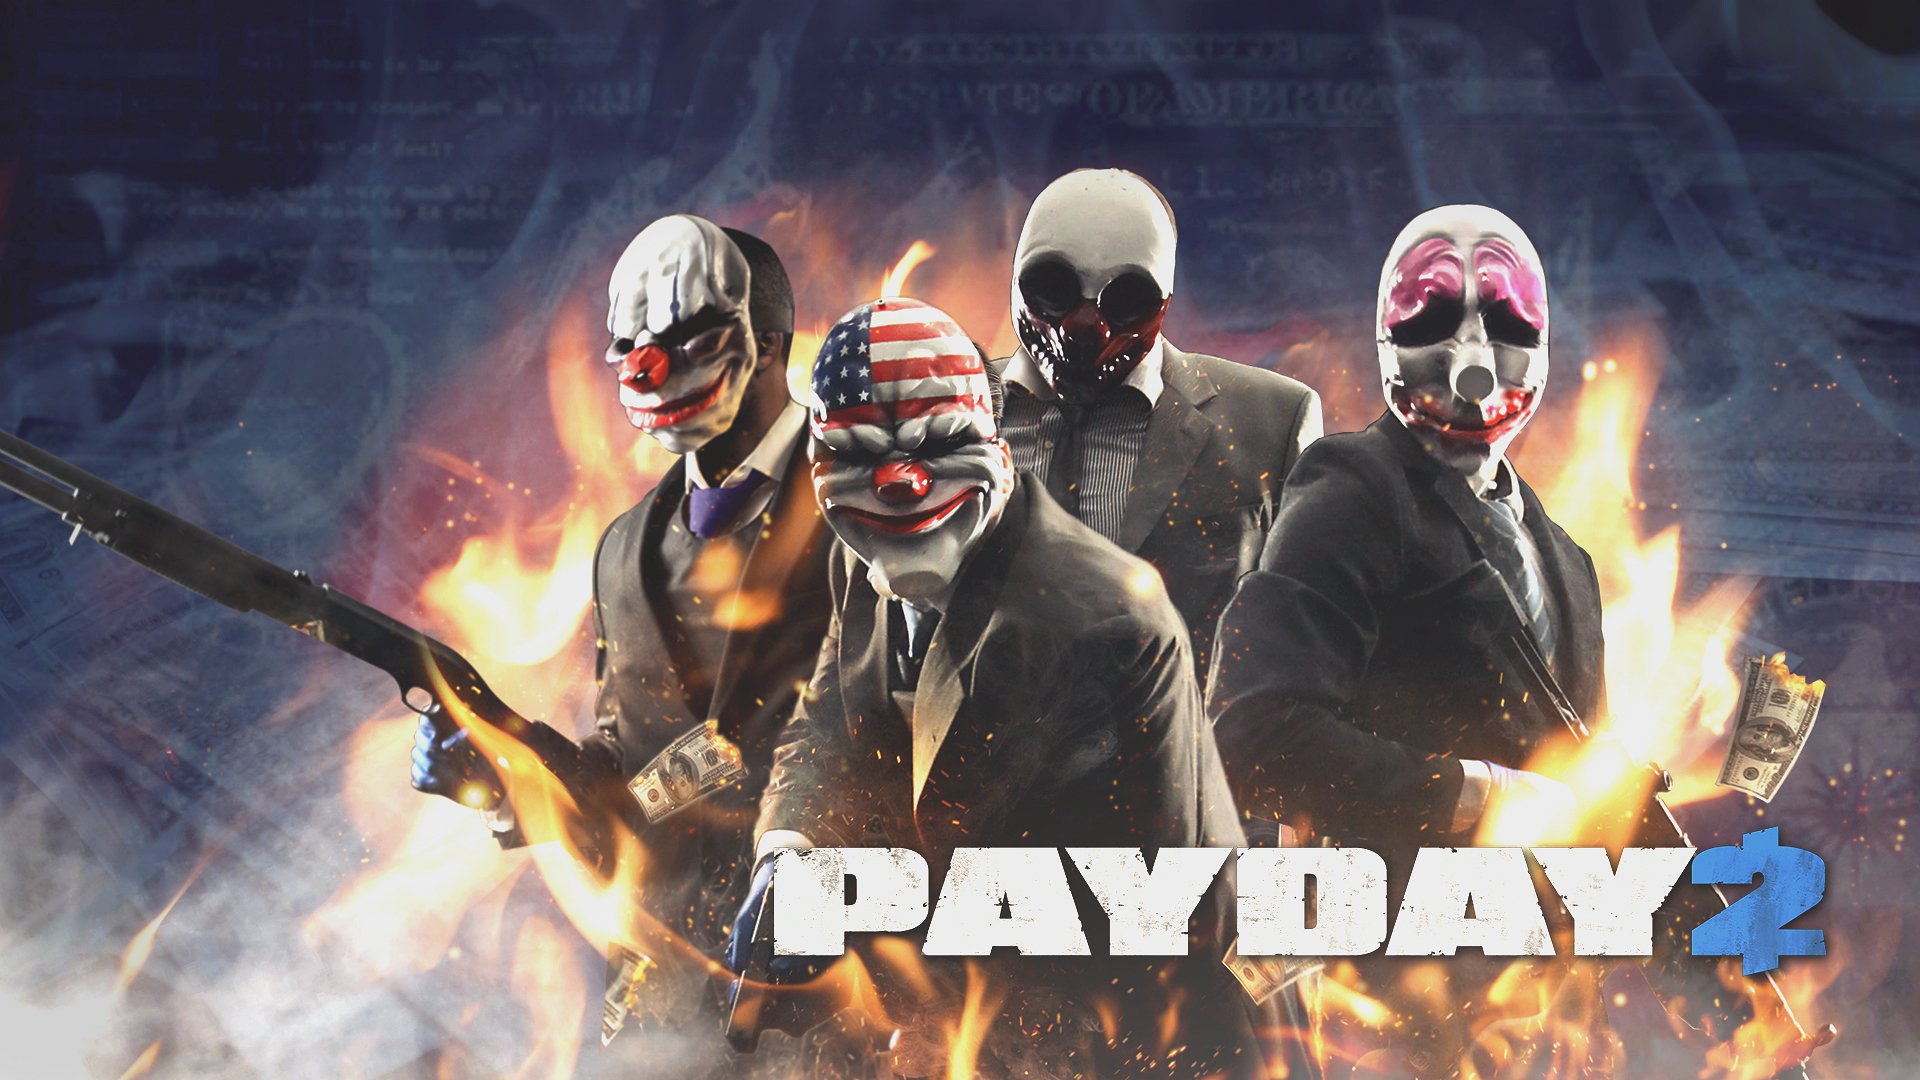 payday 2 wallpaper hd,movie,poster,fictional character,font,photography